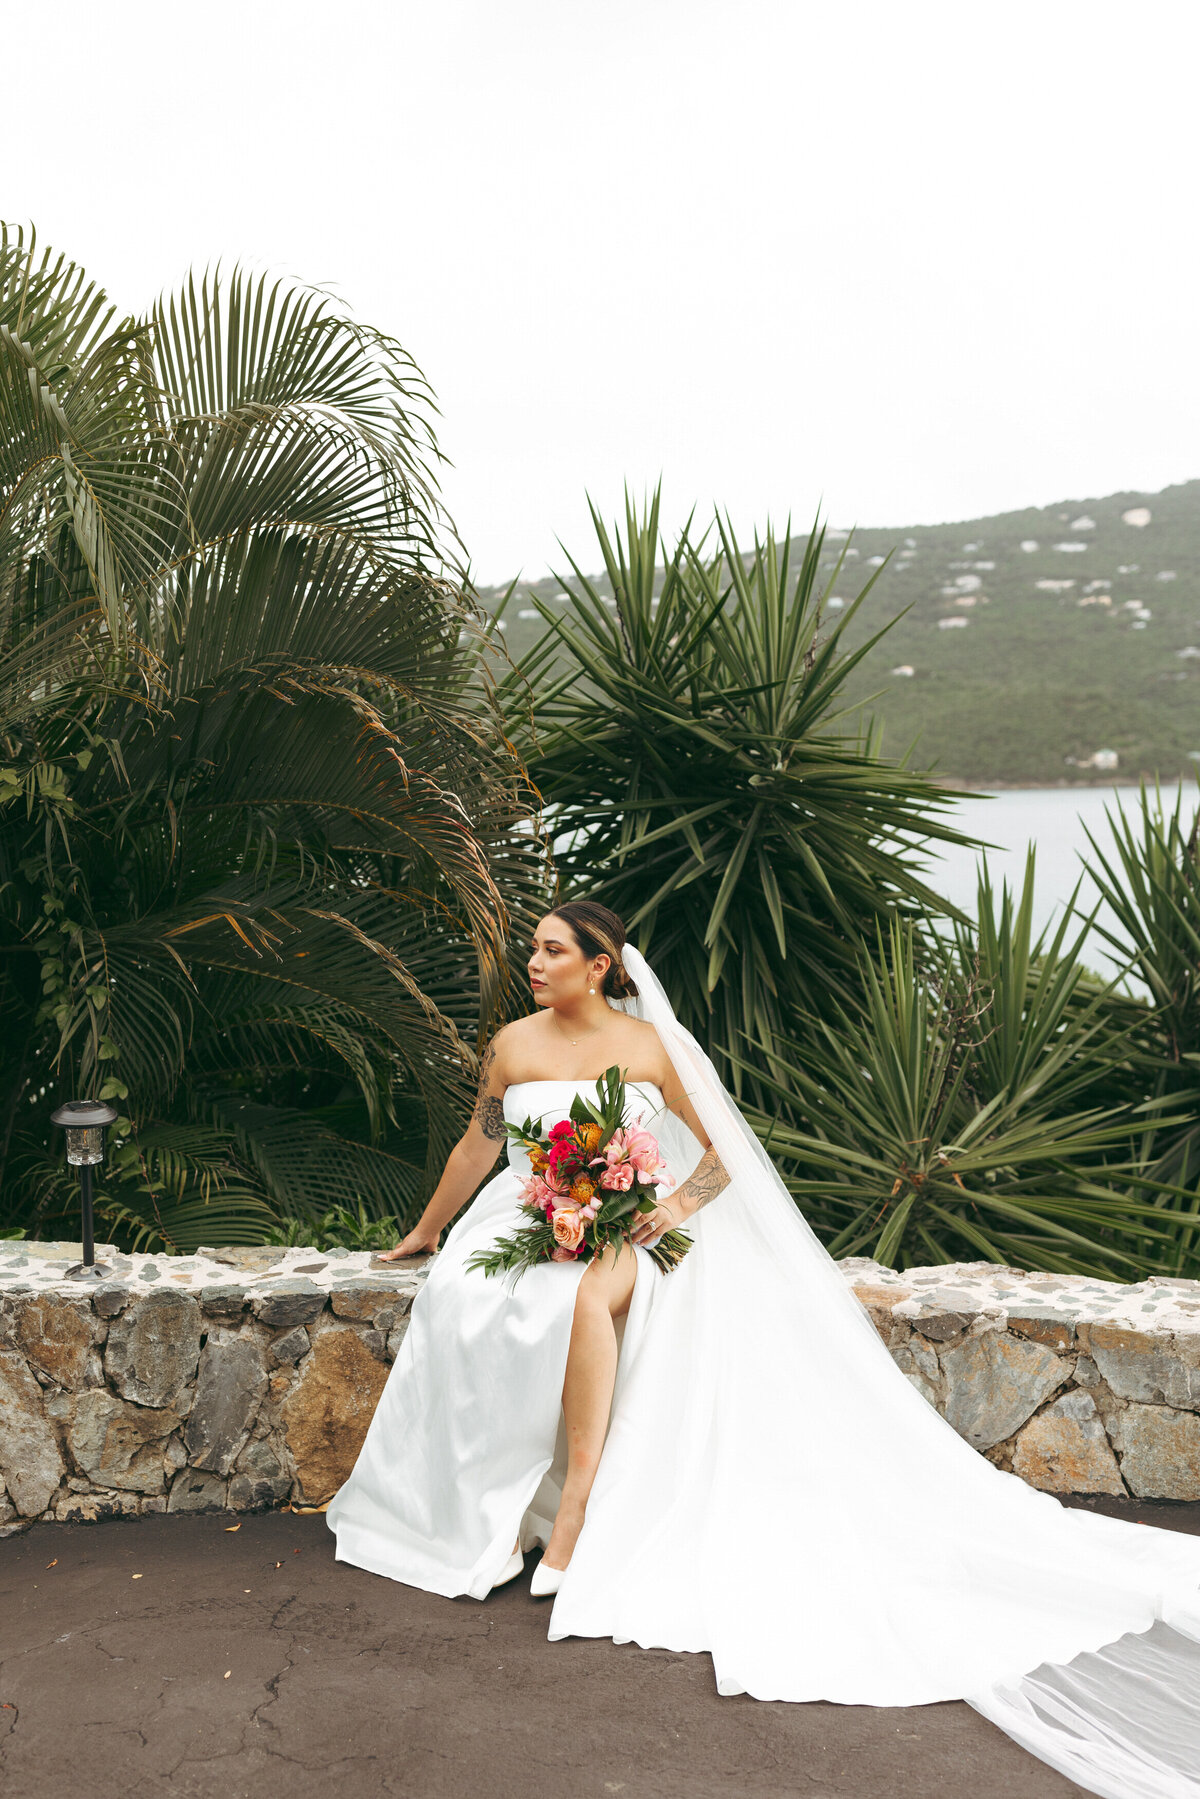 Elegant bride sitting on a stone wall with lush tropical plants in the background